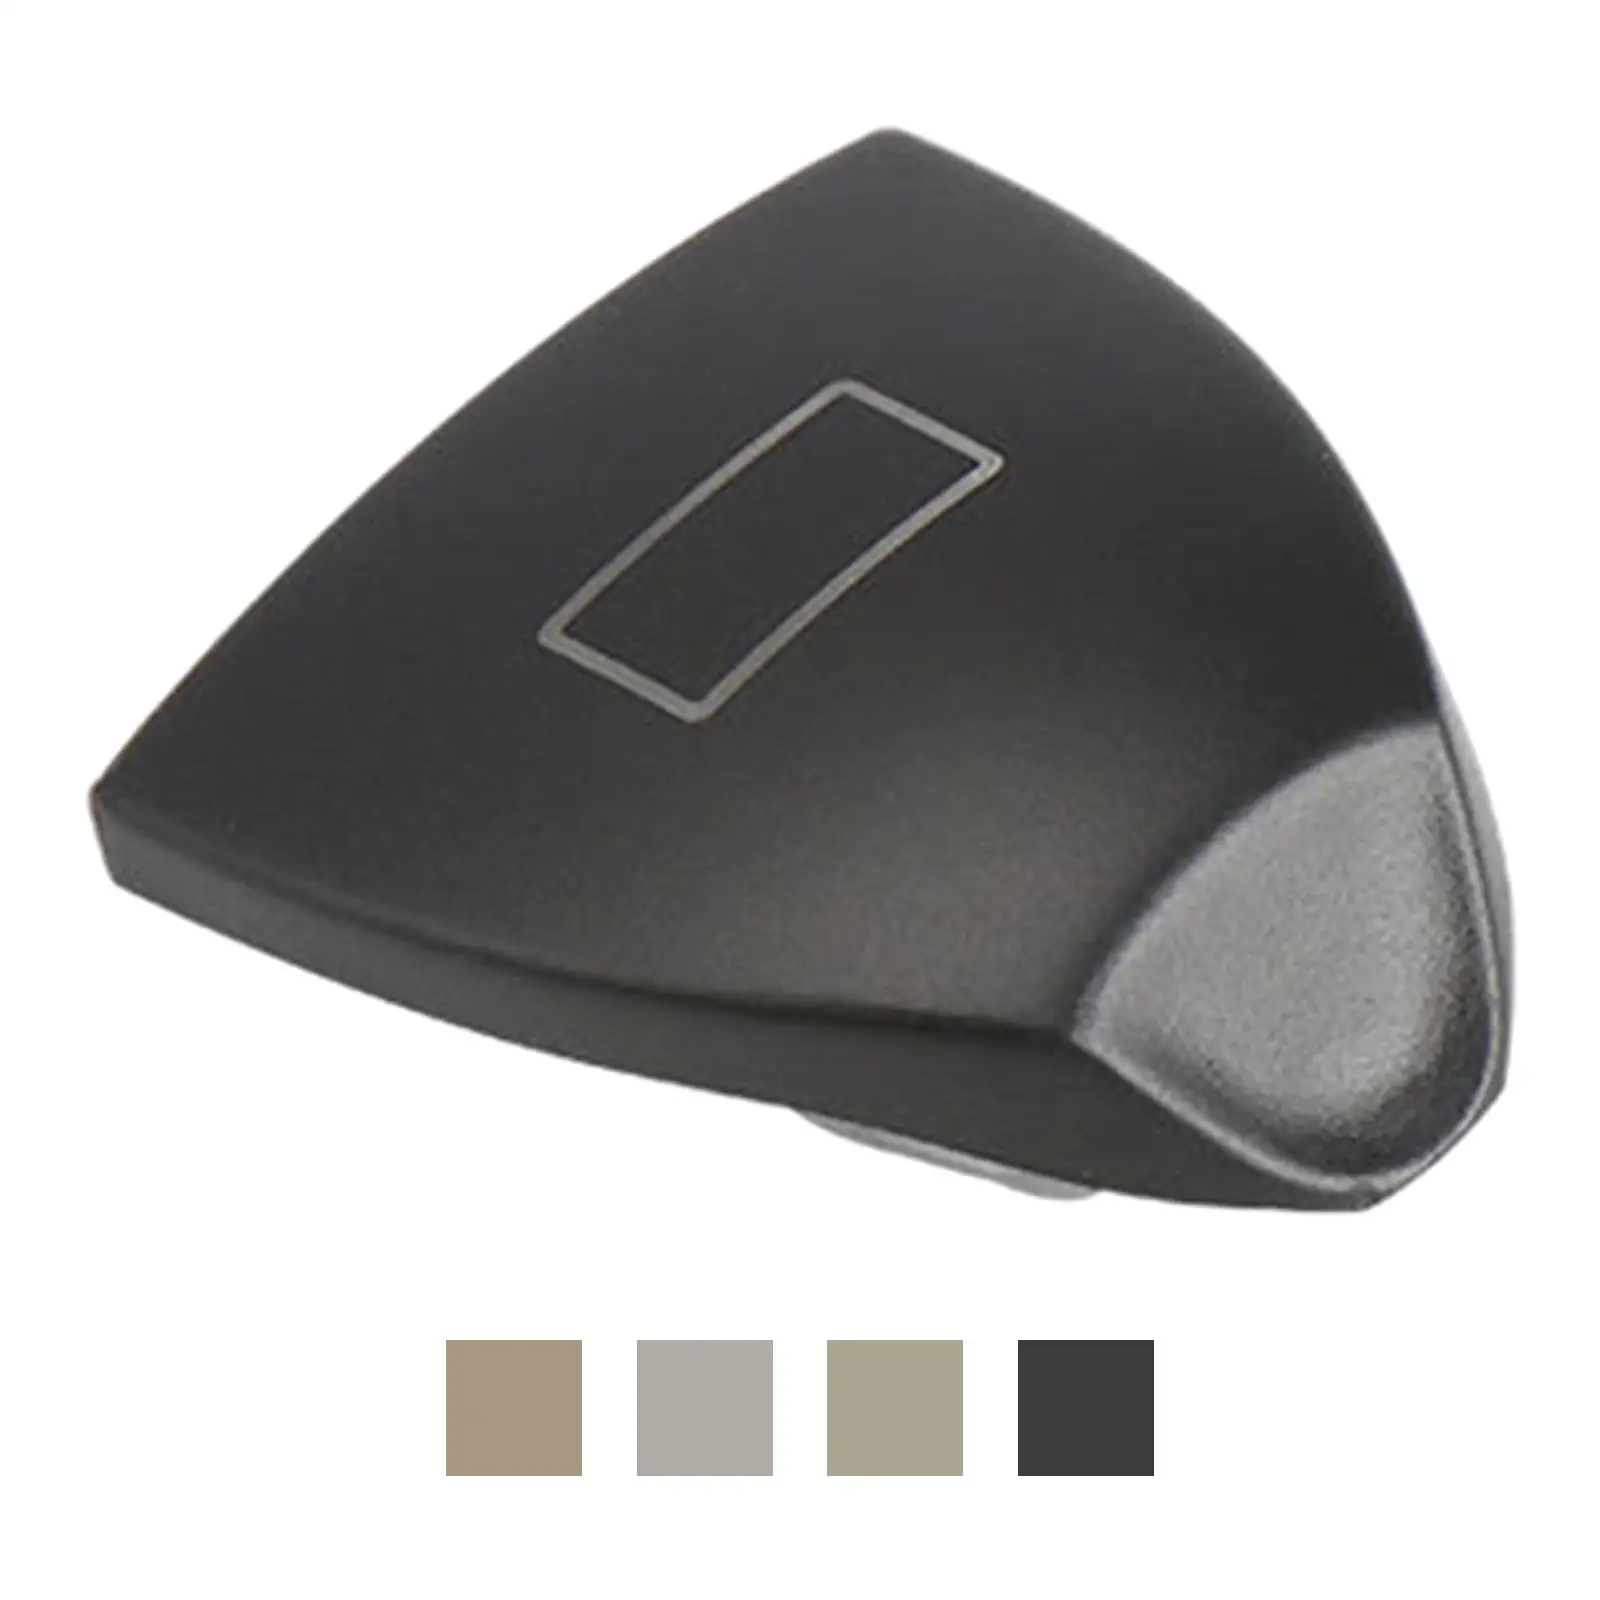 W211 Sunroof Window Switch Button Roof Control Car Replace Parts Switch Button Cover Automotive for Benz E-Class 03-08